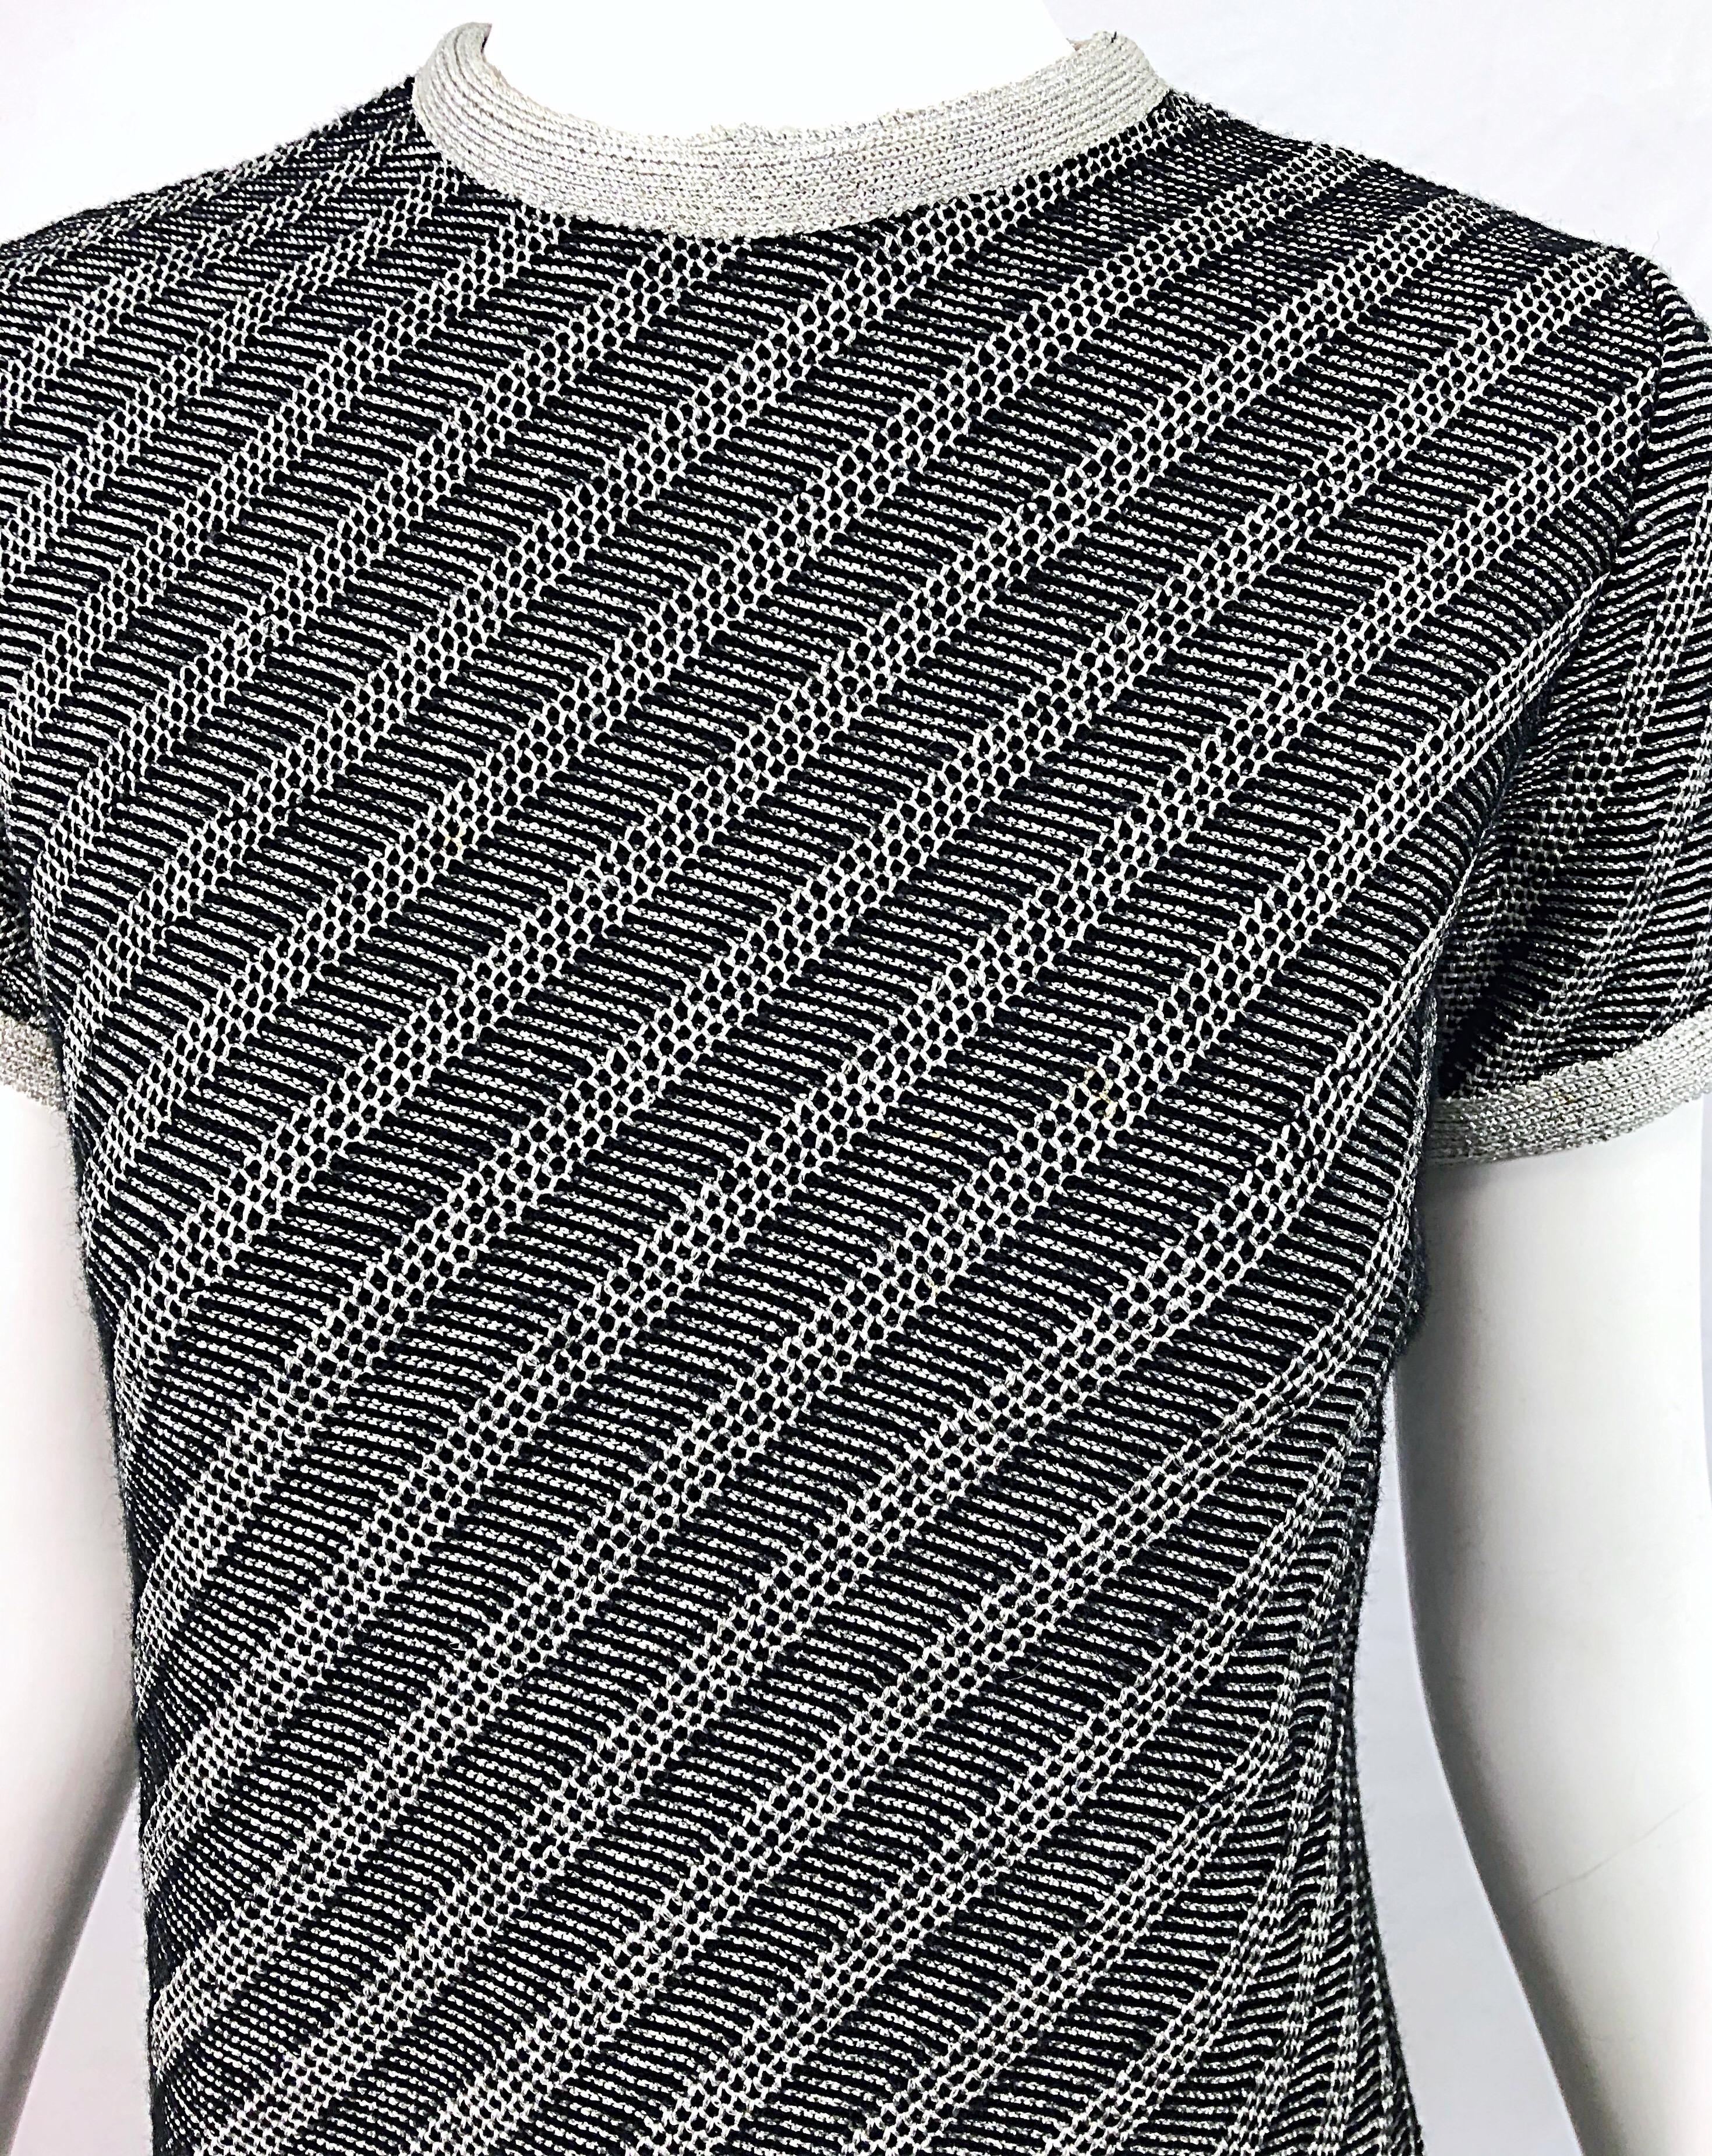 Chic 1960s Black and Silver Metallic Knit Vintage Striped 60s Shift Dress In Excellent Condition For Sale In San Diego, CA